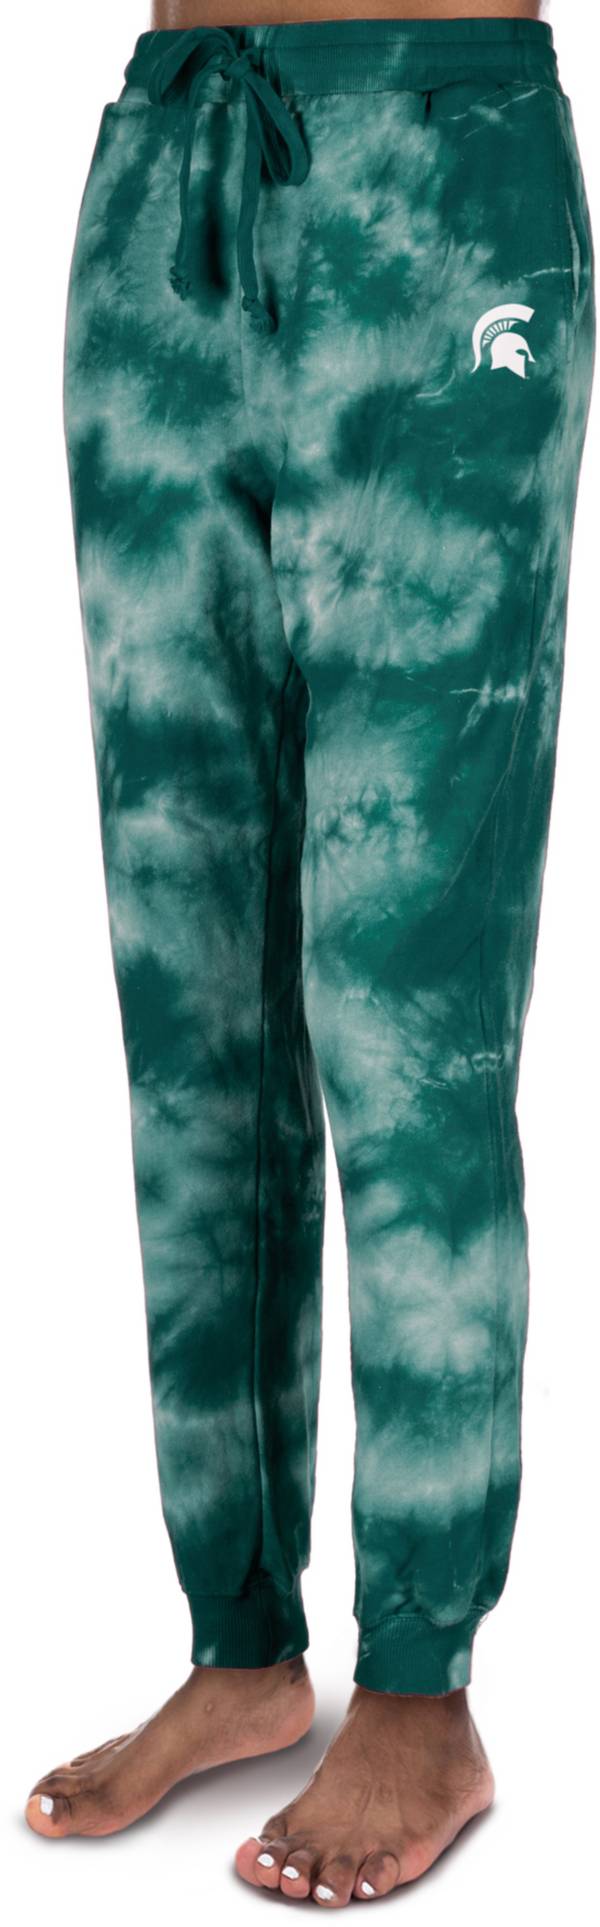 ZooZatZ Women's Michigan State Spartans Green Tie-Dye High-Waisted Joggers product image